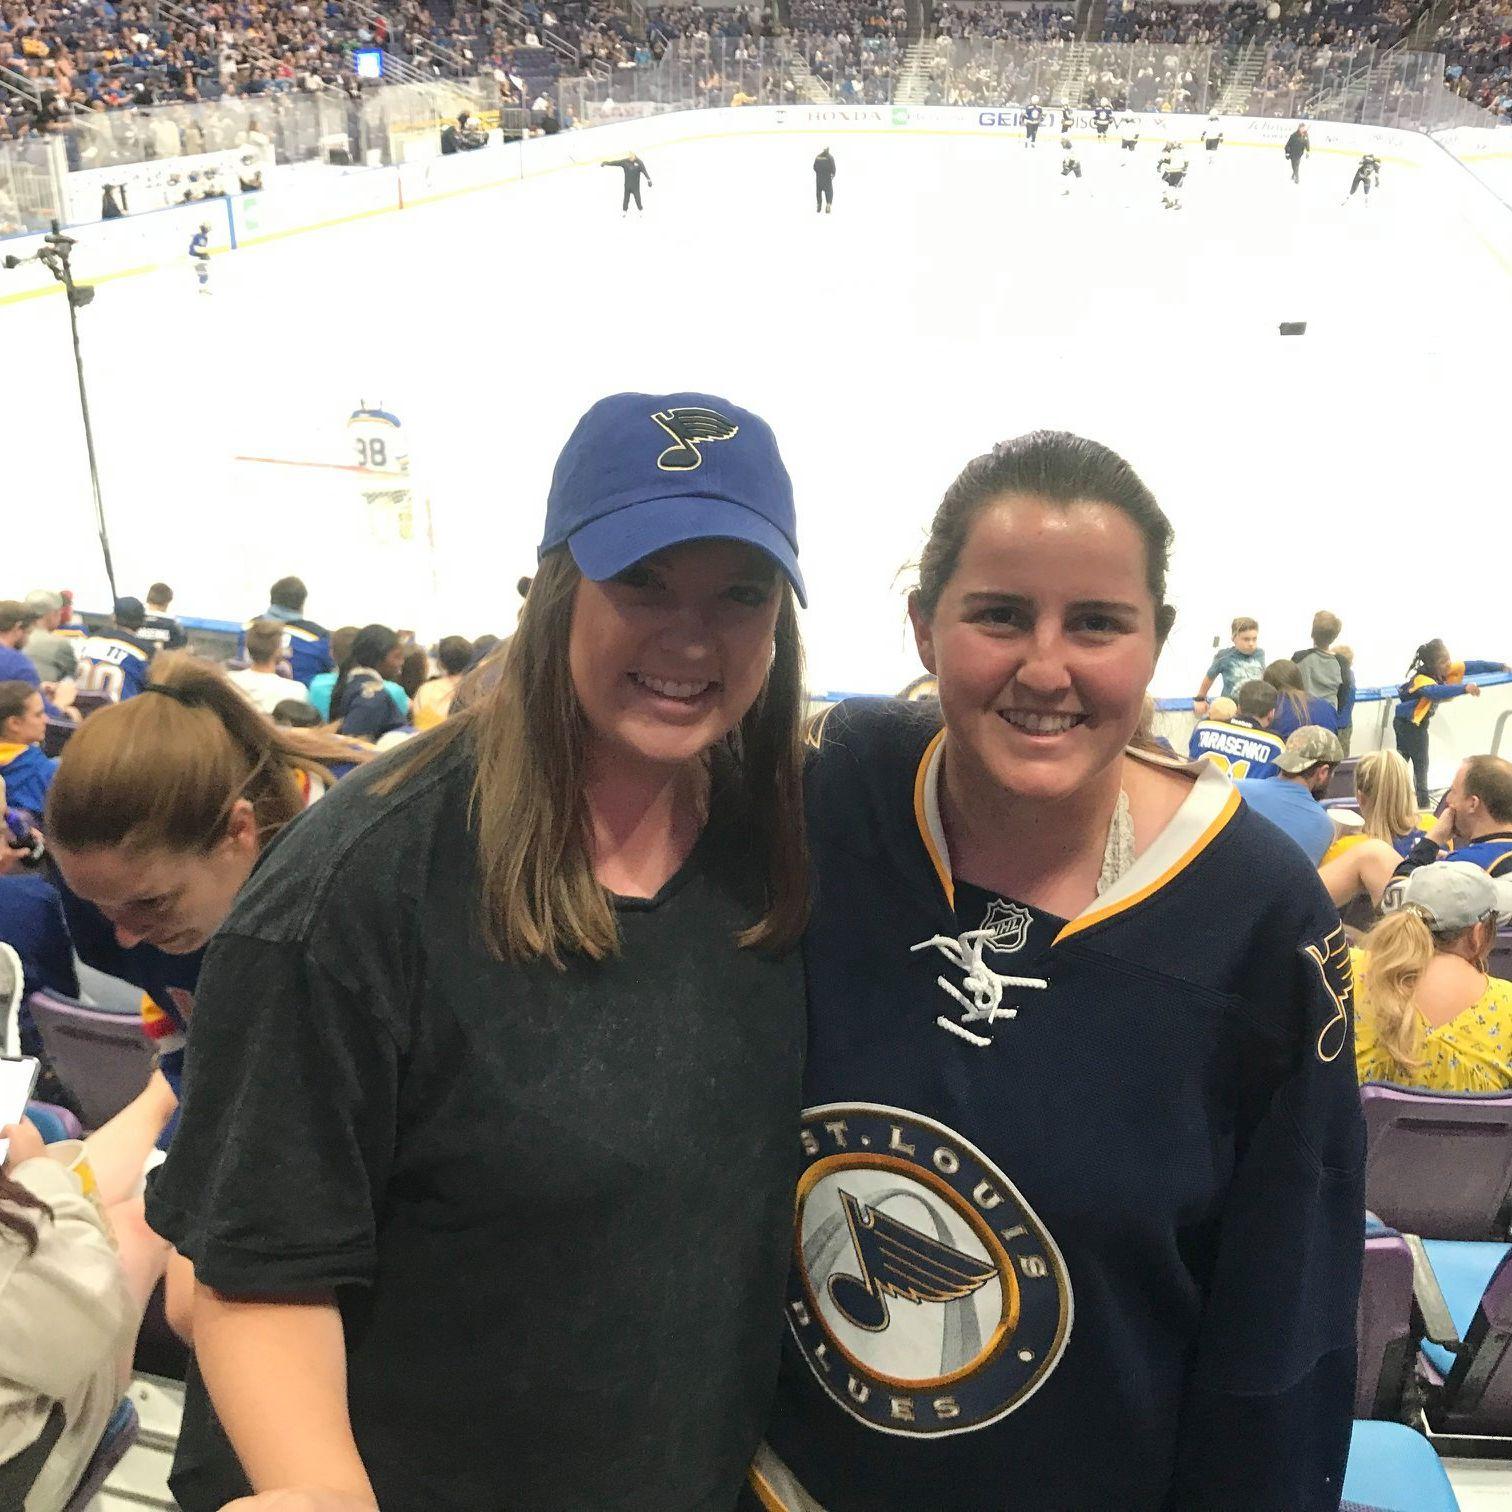 Cheering for the Blues in the 2019 Playoffs!